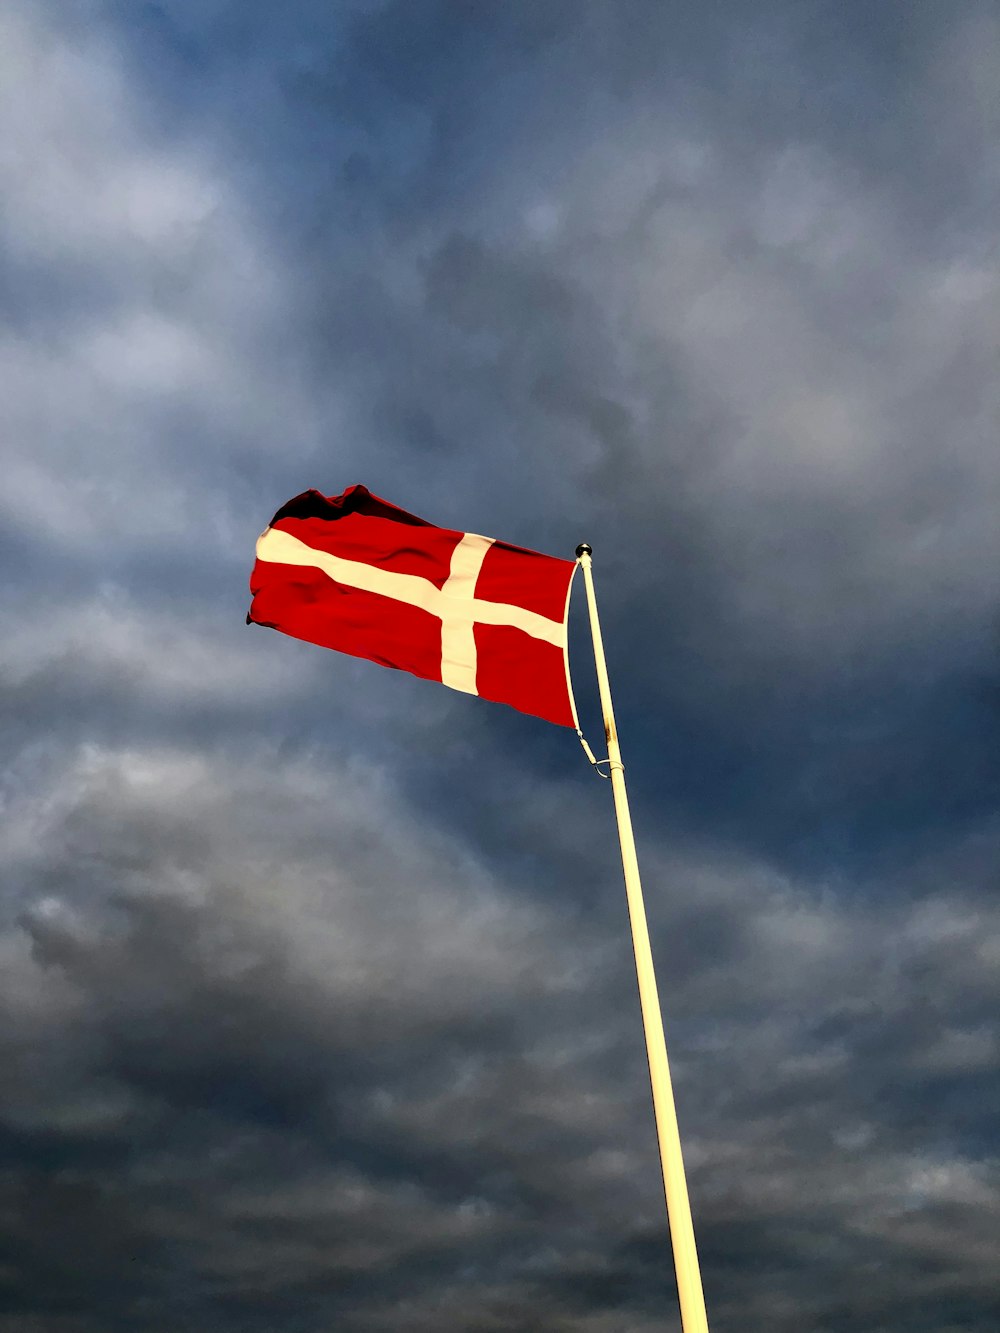 red and white cross flag on top of pole during day